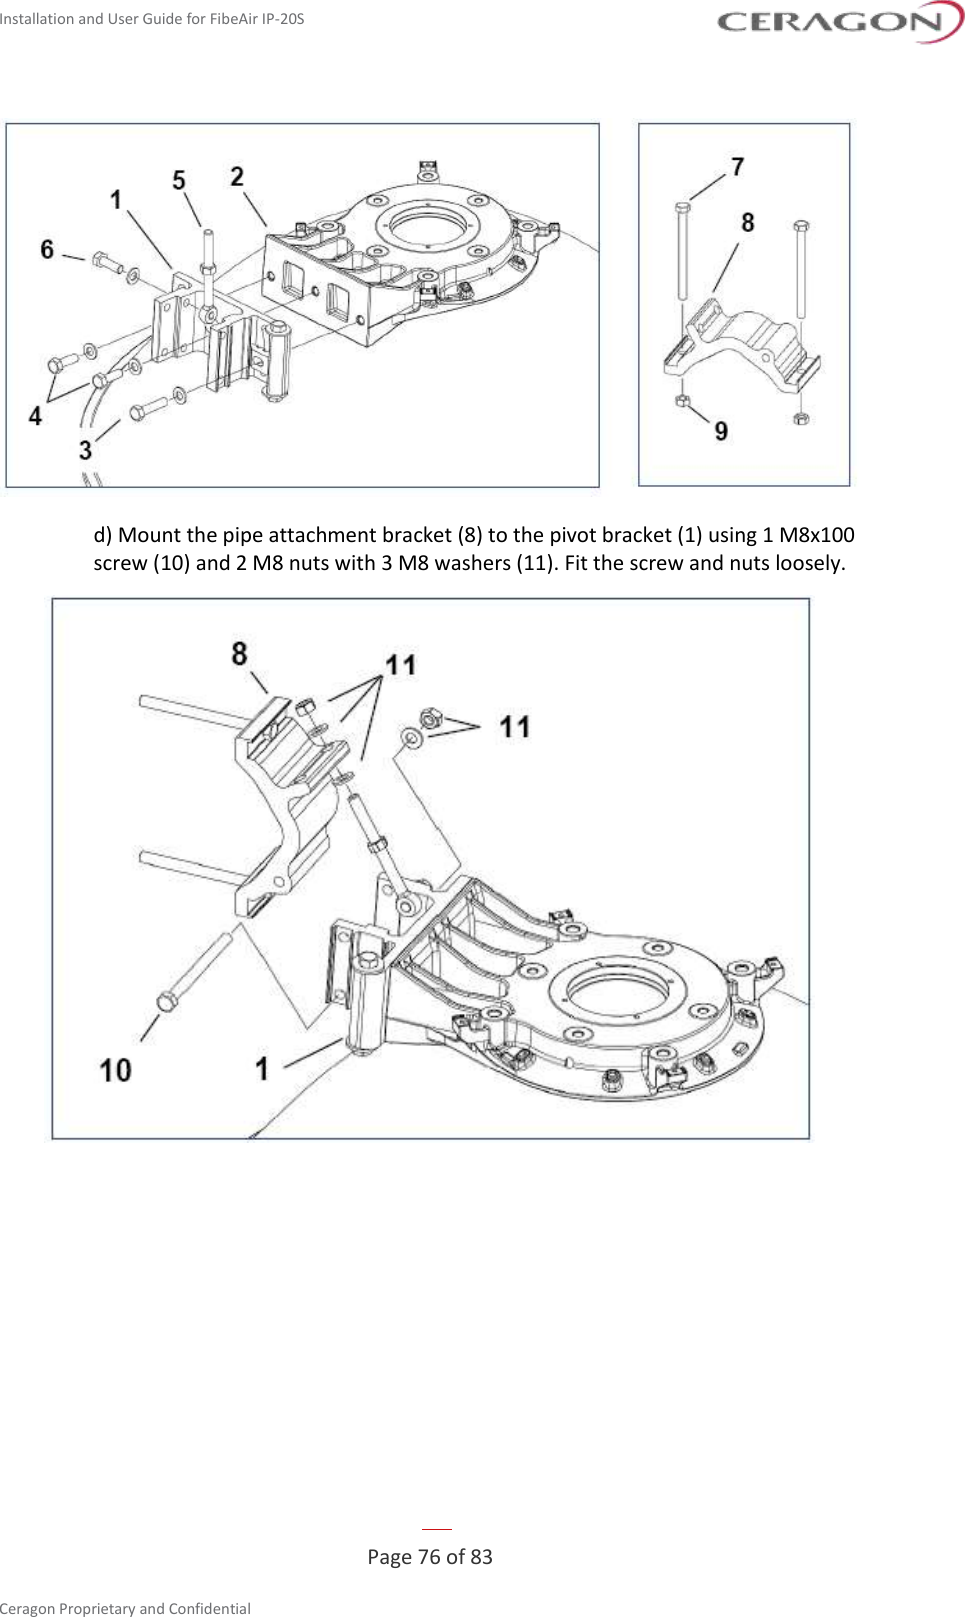 Installation and User Guide for FibeAir IP-20S   Page 76 of 83  Ceragon Proprietary and Confidential      d) Mount the pipe attachment bracket (8) to the pivot bracket (1) using 1 M8x100 screw (10) and 2 M8 nuts with 3 M8 washers (11). Fit the screw and nuts loosely.  